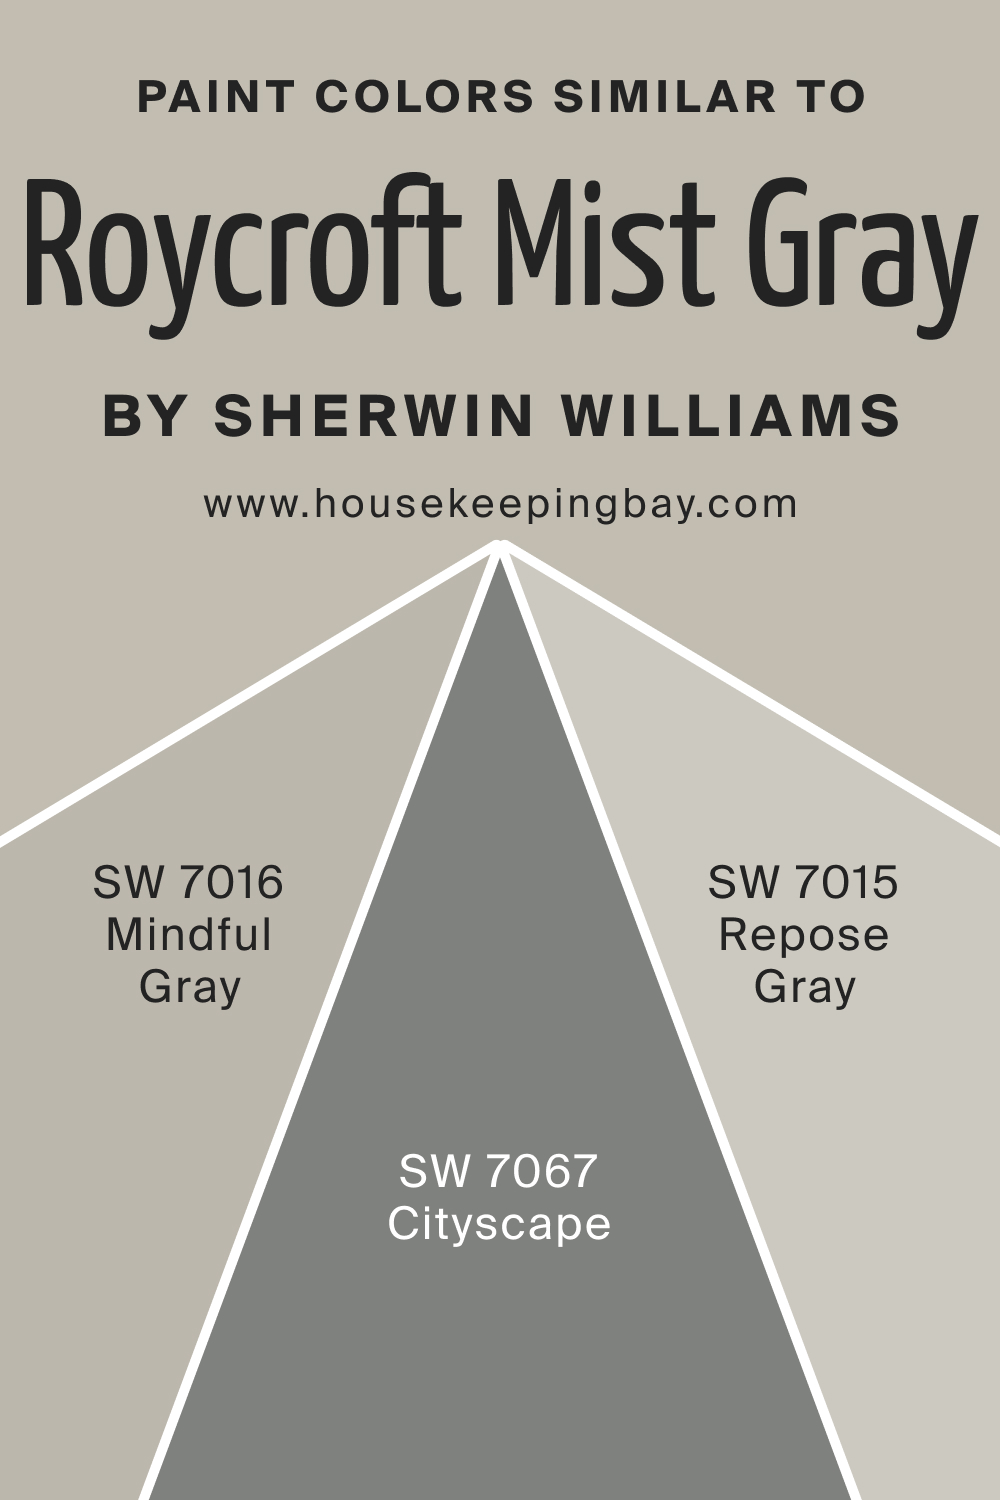 Paint Color Similar to SW 2844 Roycroft Mist Gray by Sherwin Williams